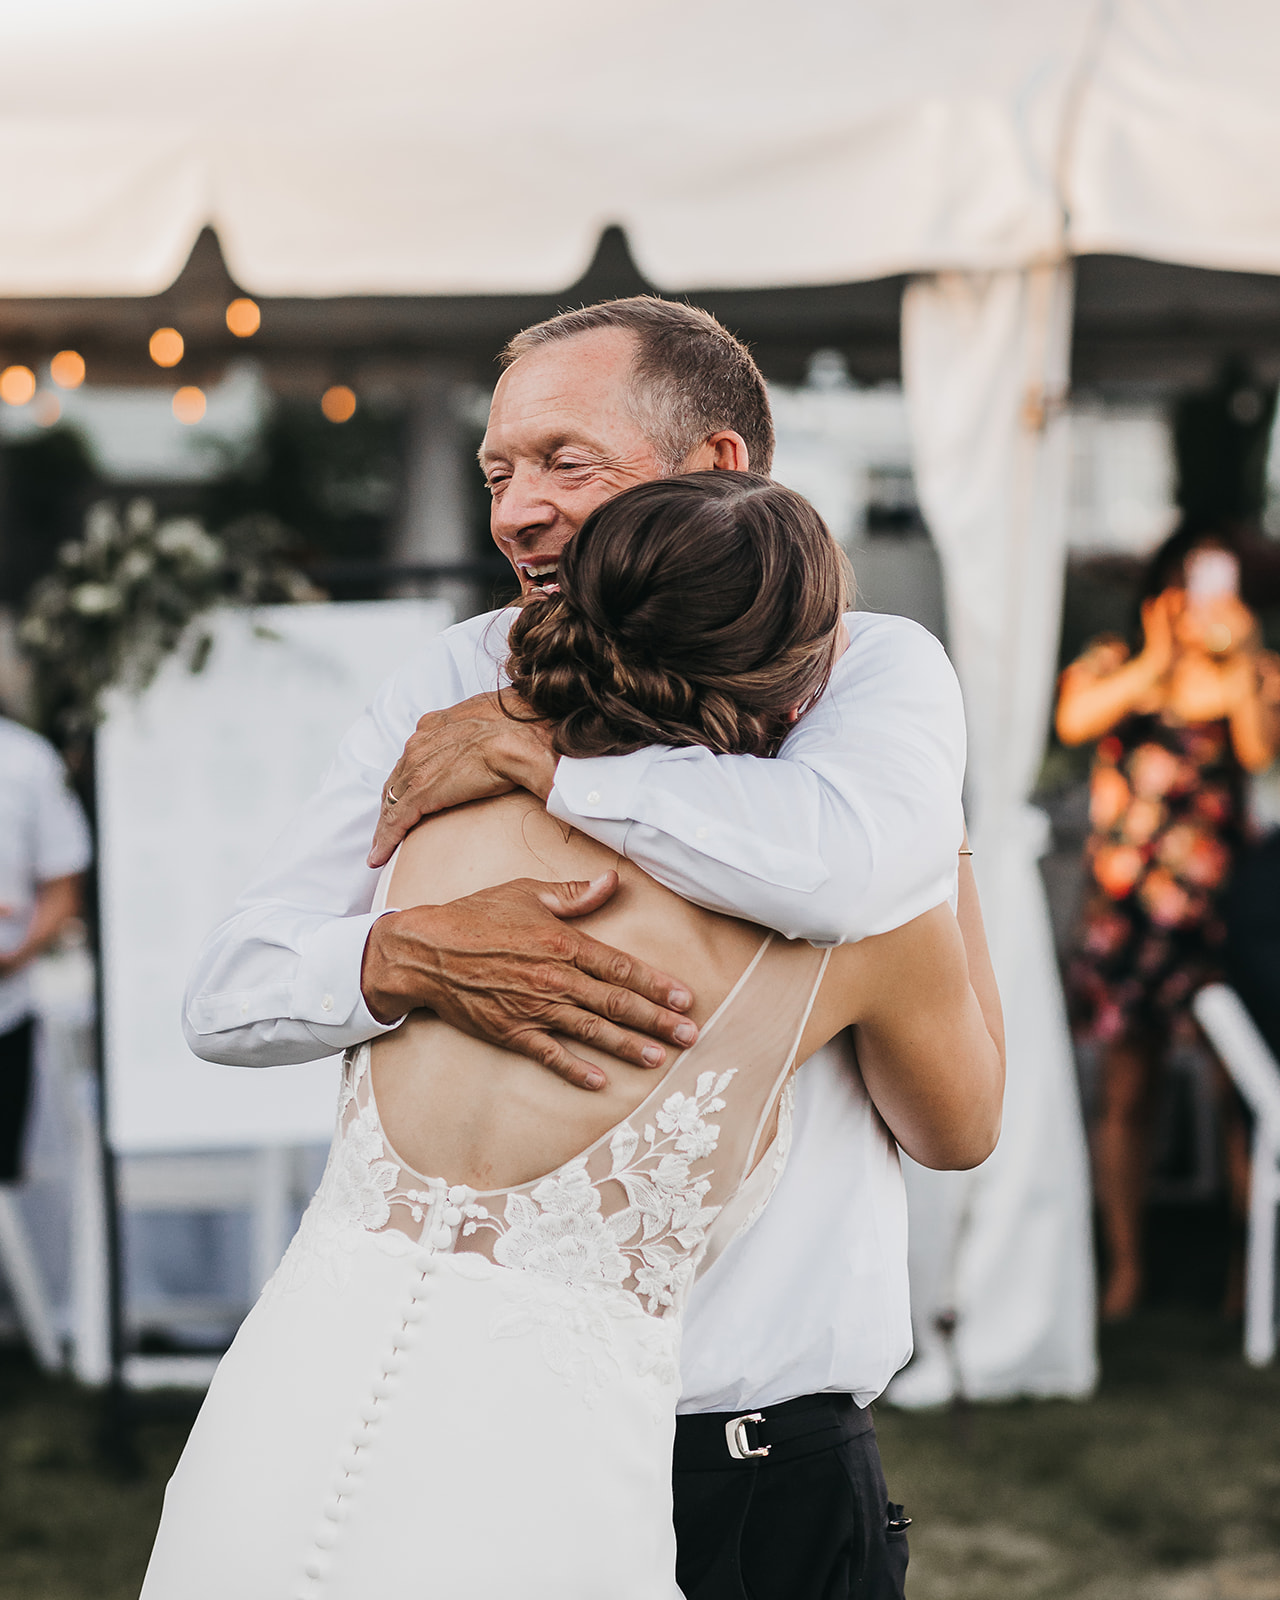 Father daughter dance at wedding reception at private lake house wedding. 